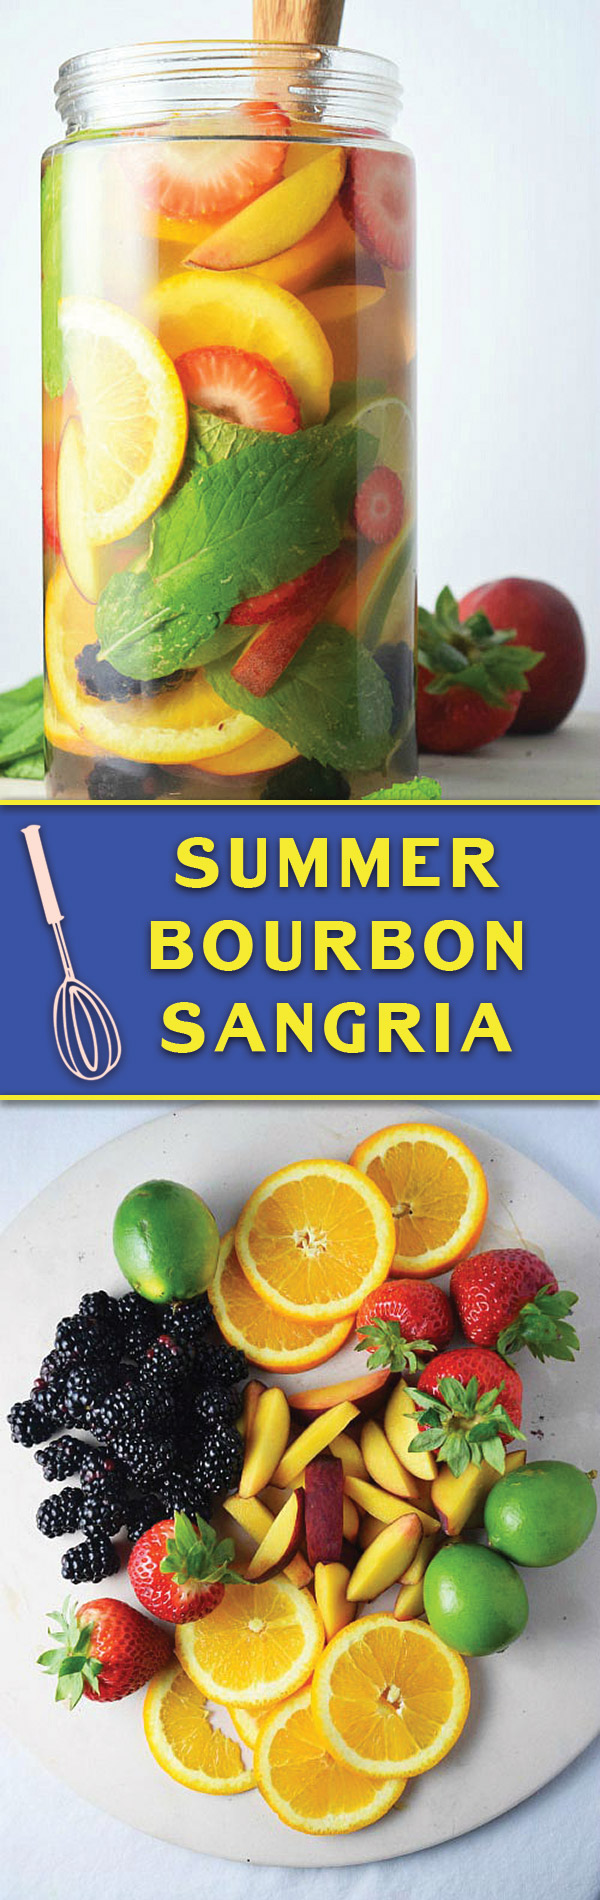 Summer Bourbon Sangria - tons of fresh summer fruits, the best wine & bourbon combo, this SANGRIA is one my friends & family always demand! 